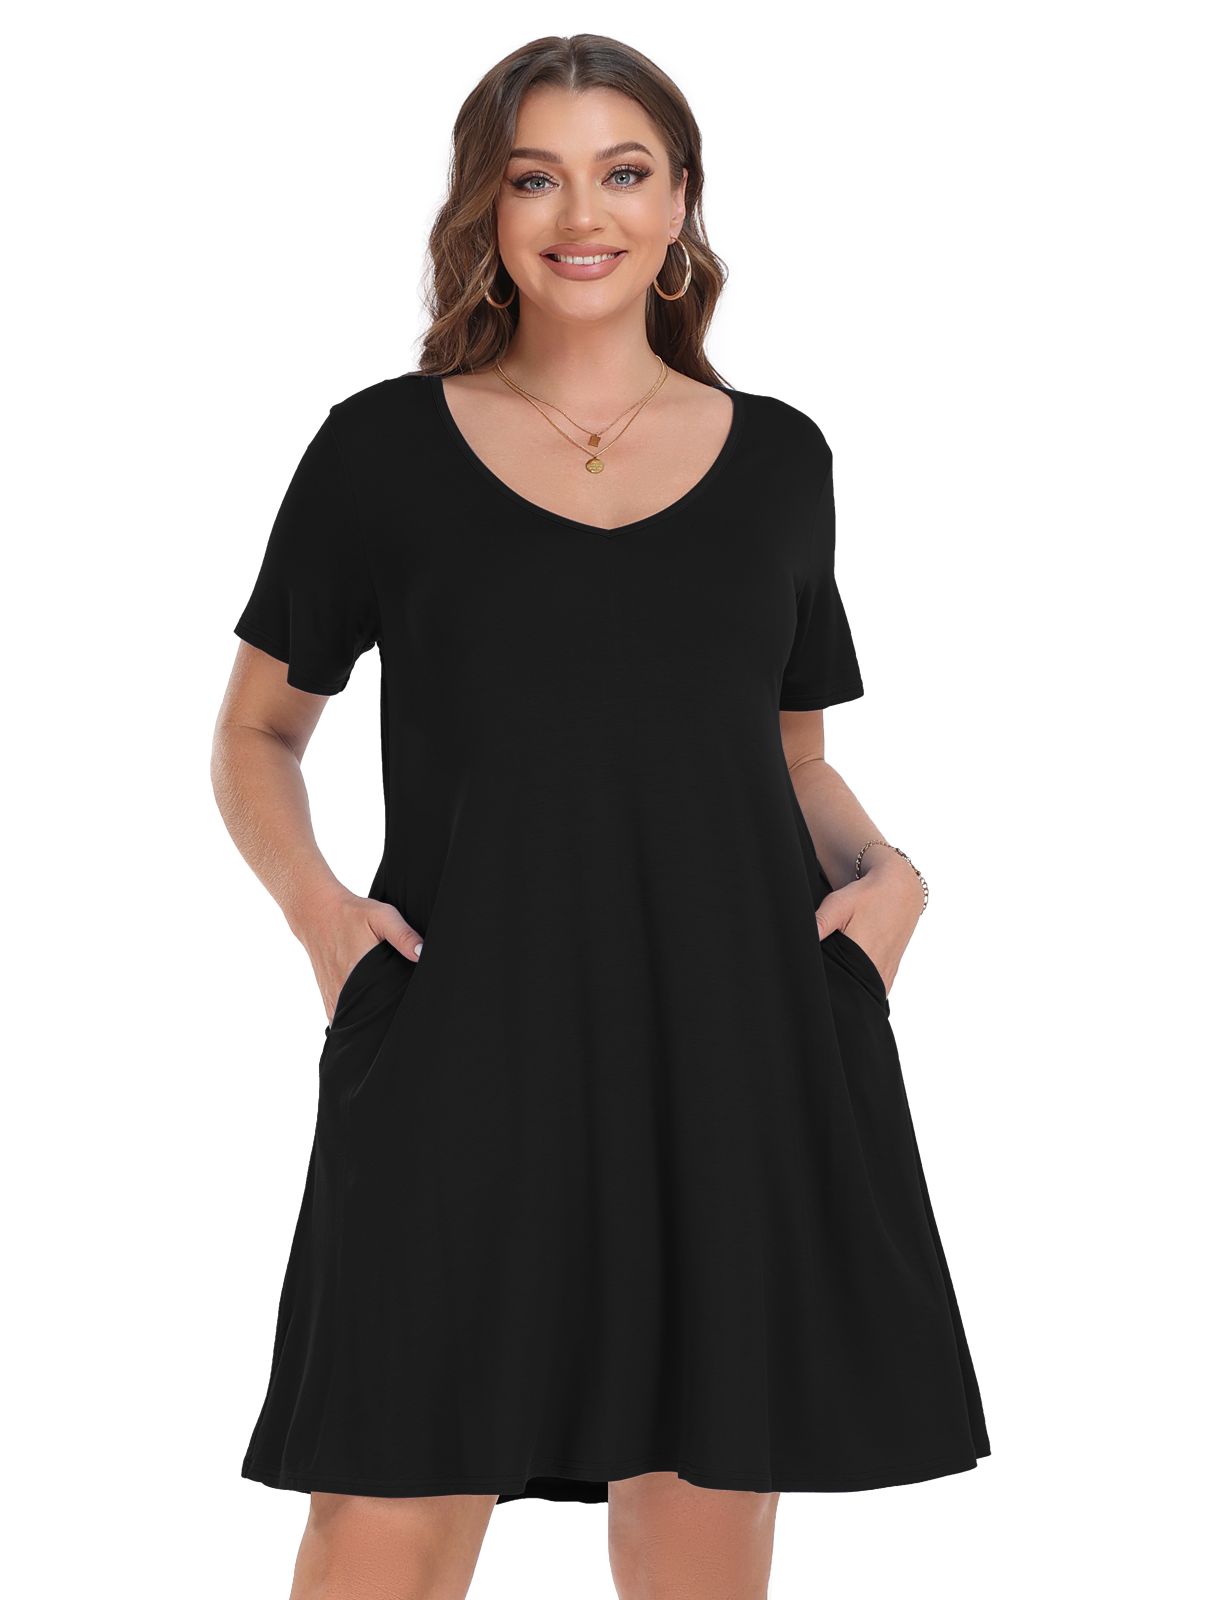 Plus Size Black Dresses 4X for Women, VEPKUL V Neck T Shirt Dress 2024 Short Sleeve Casual Loose Swing Summer Dress with Pockets - image 5 of 9